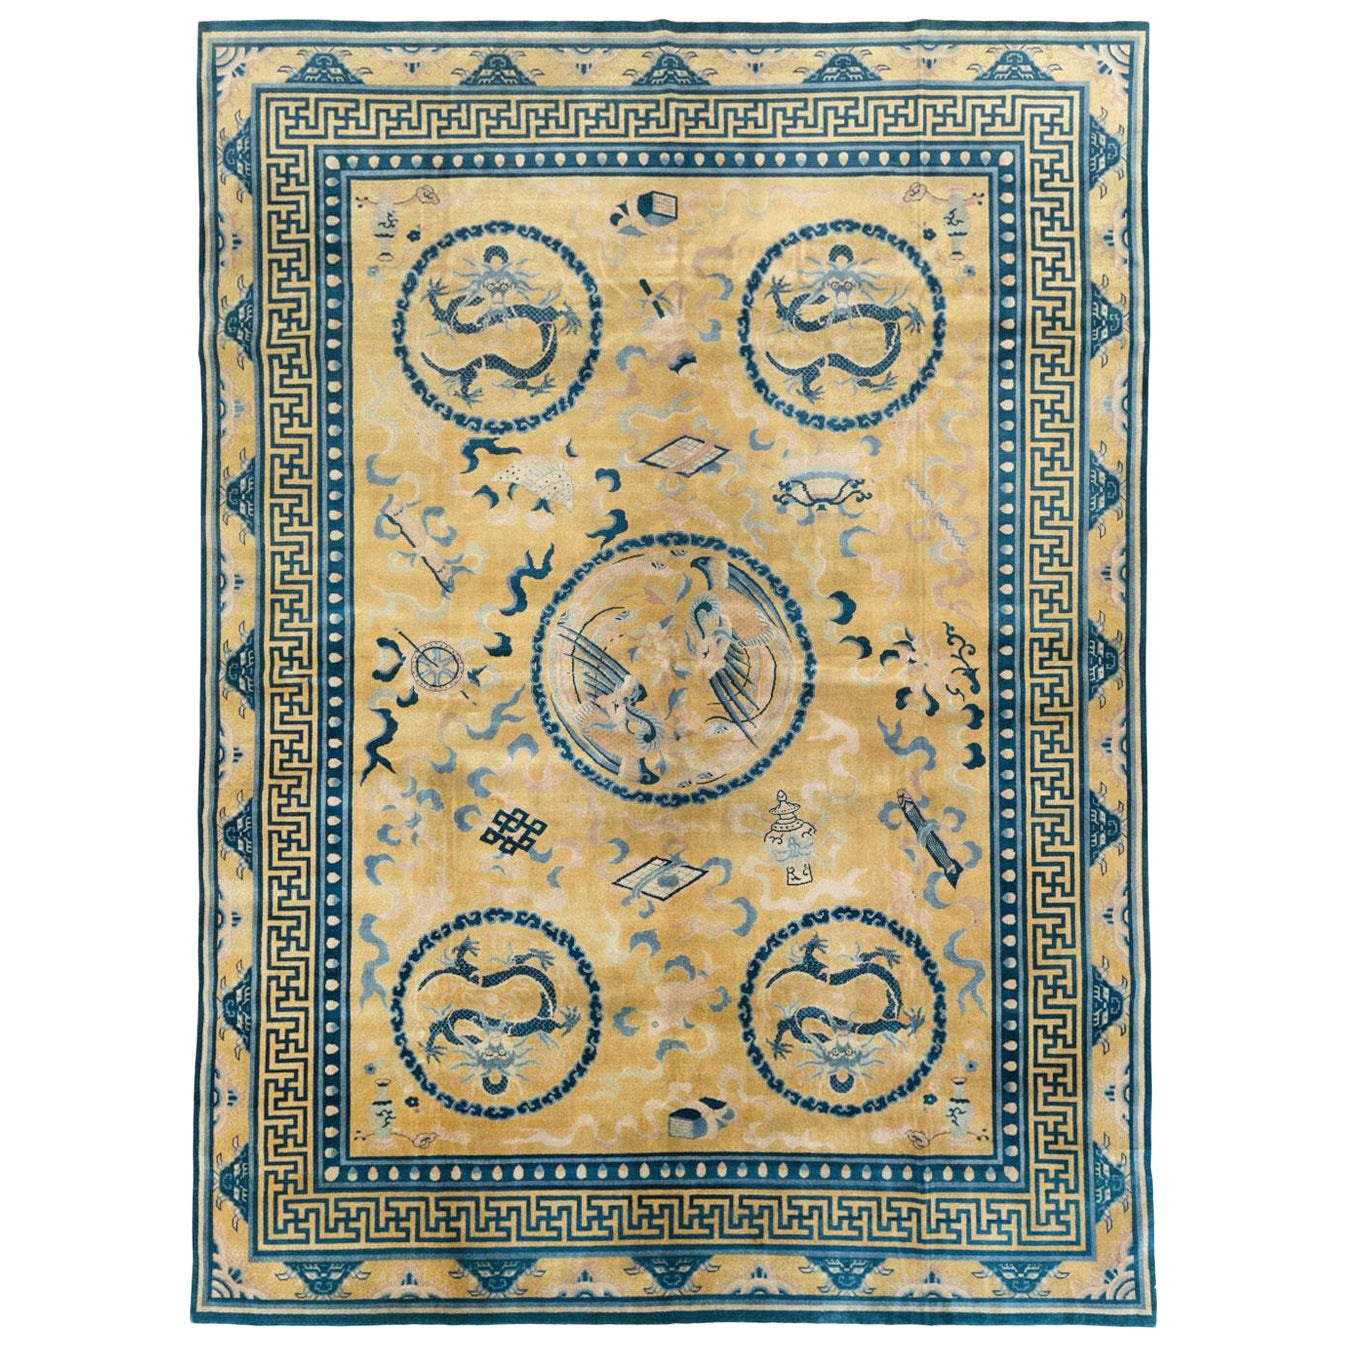 Early 20th Century Chinese Peking Large Room Size Rug